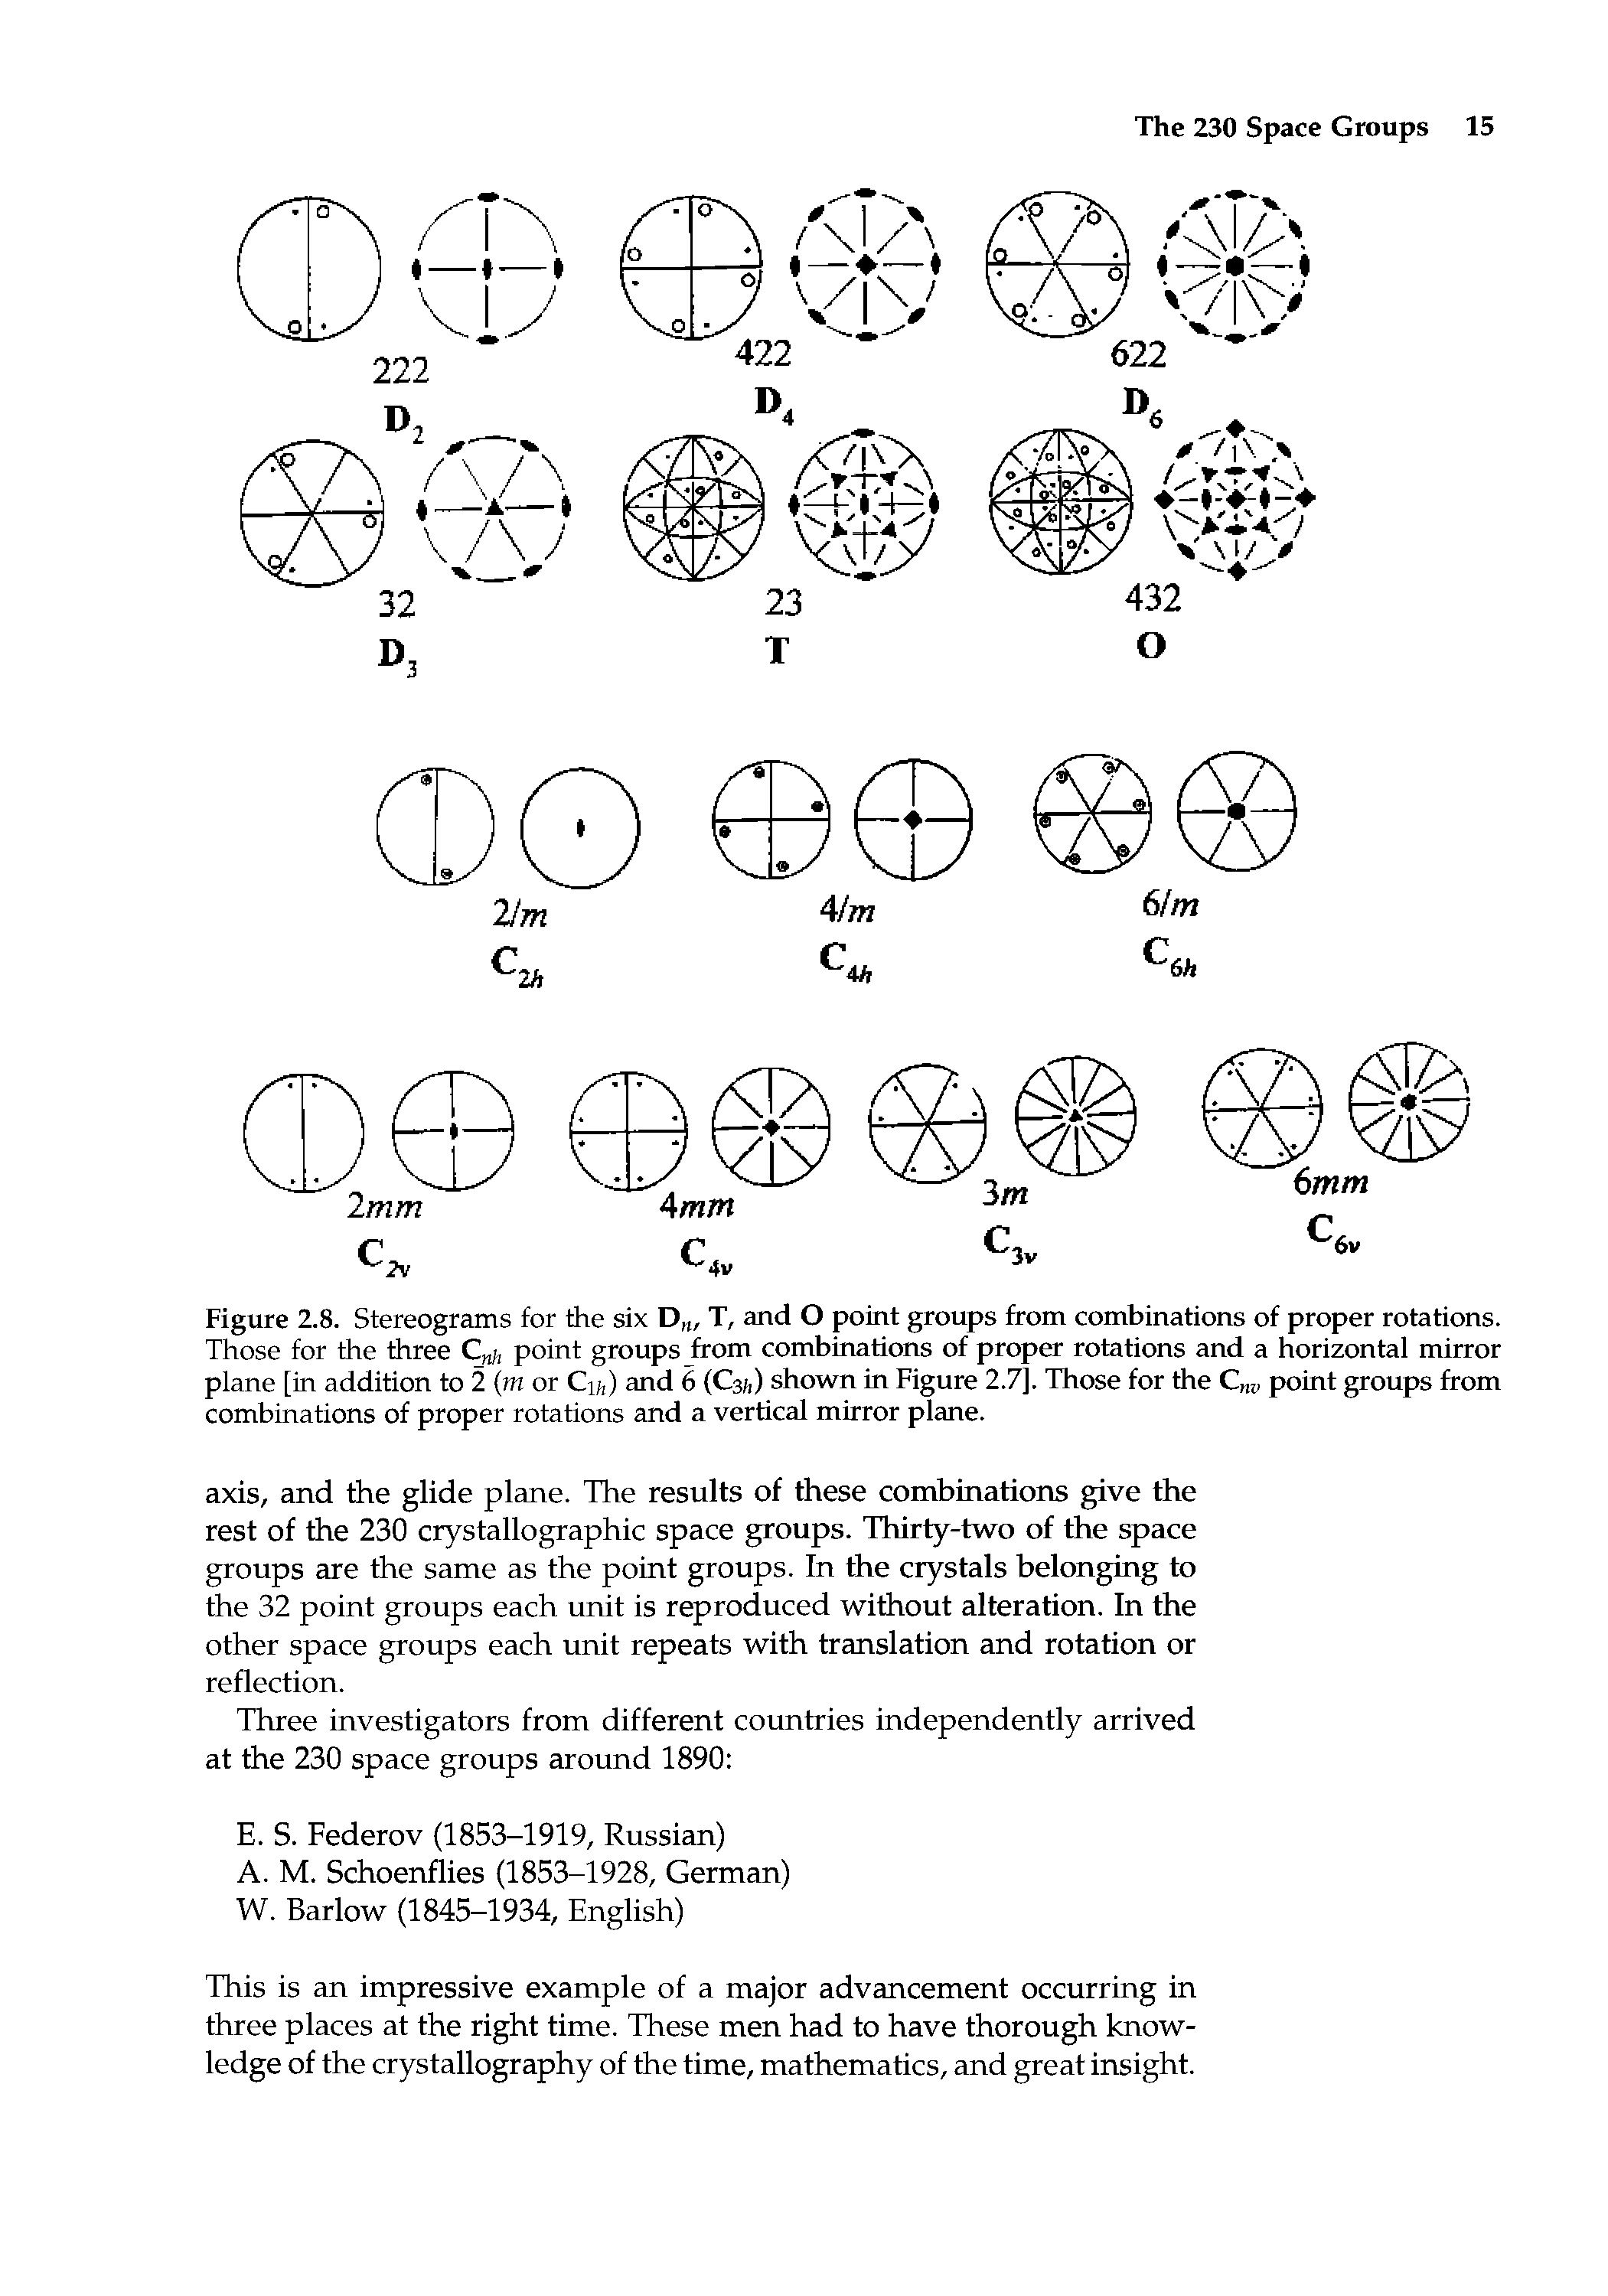 Figure 2.8. Stereograms for the six D , T, and O point groups from combinations of proper rotations. Those for the three Cni, point groups from combinations of proper rotations and a horizontal mirror plane [in addition to 2 (m or C, ) and 6 (C3/,) shown in Figure 2.7], Those for the Cm, point groups from combinations of proper rotations and a vertical mirror plane.